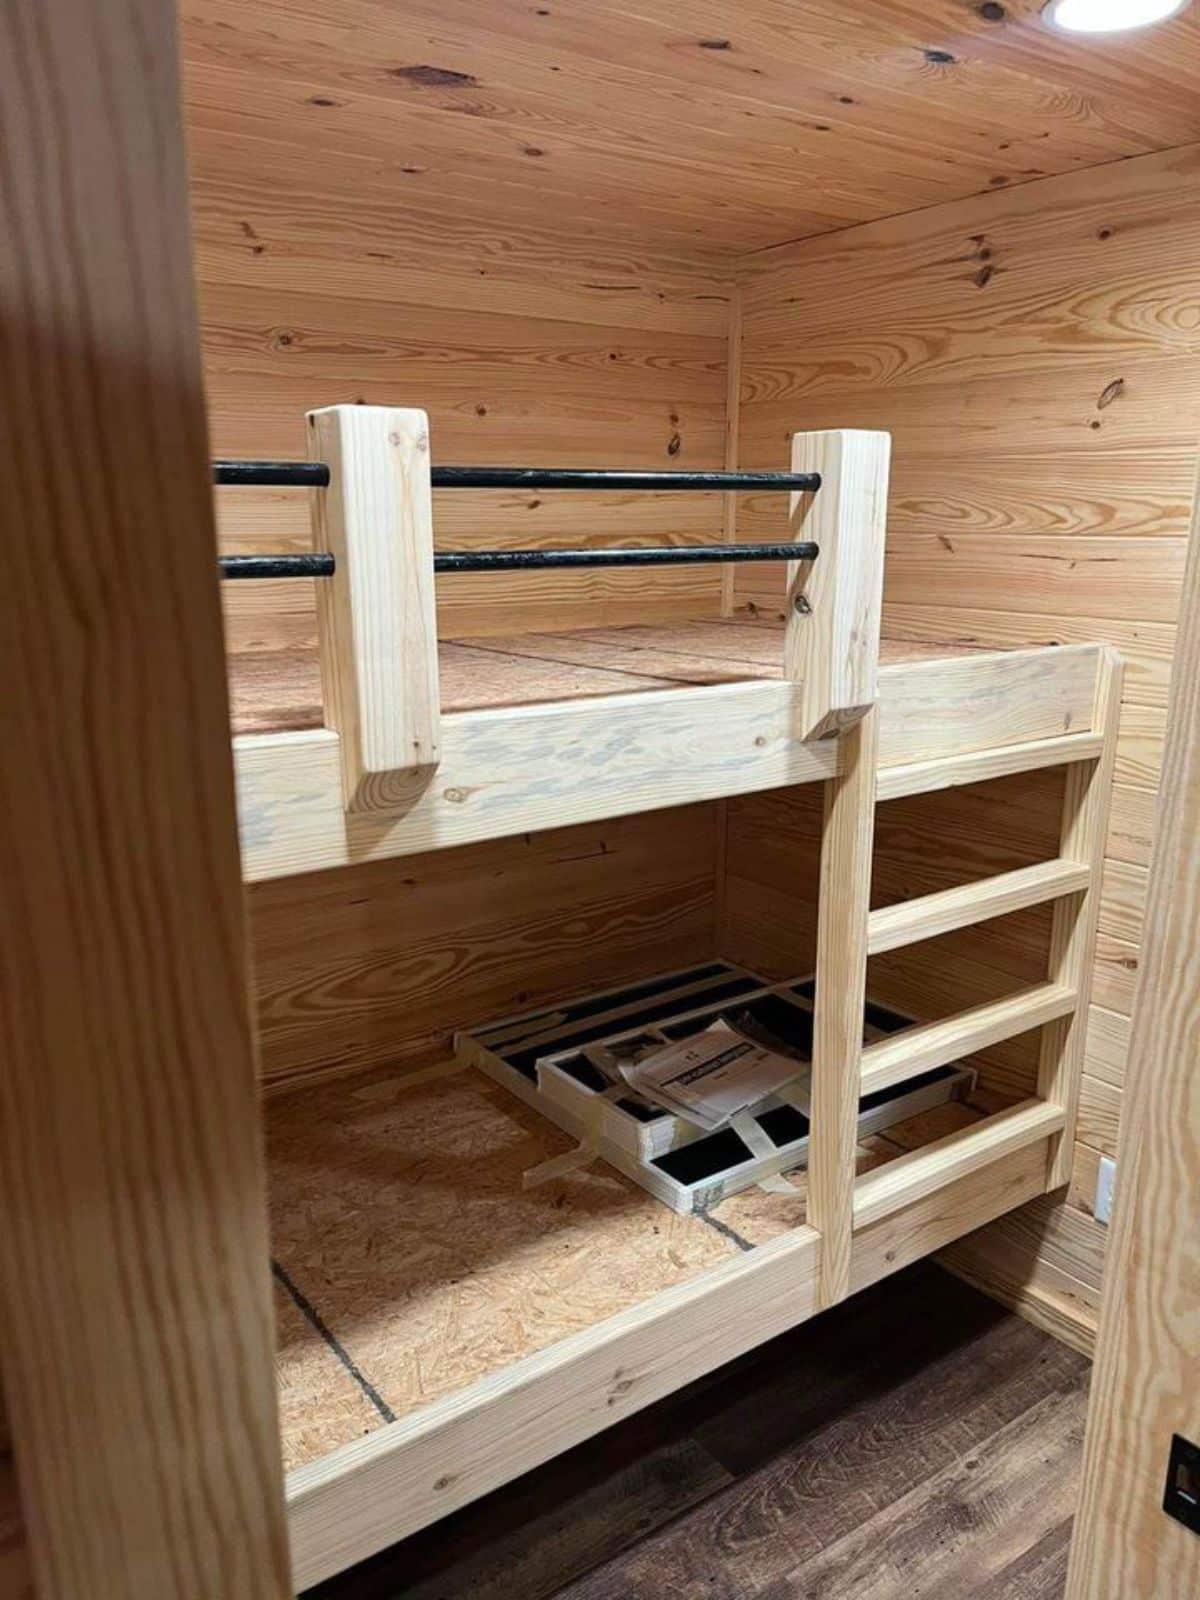 Bunk bed is also included in the deal